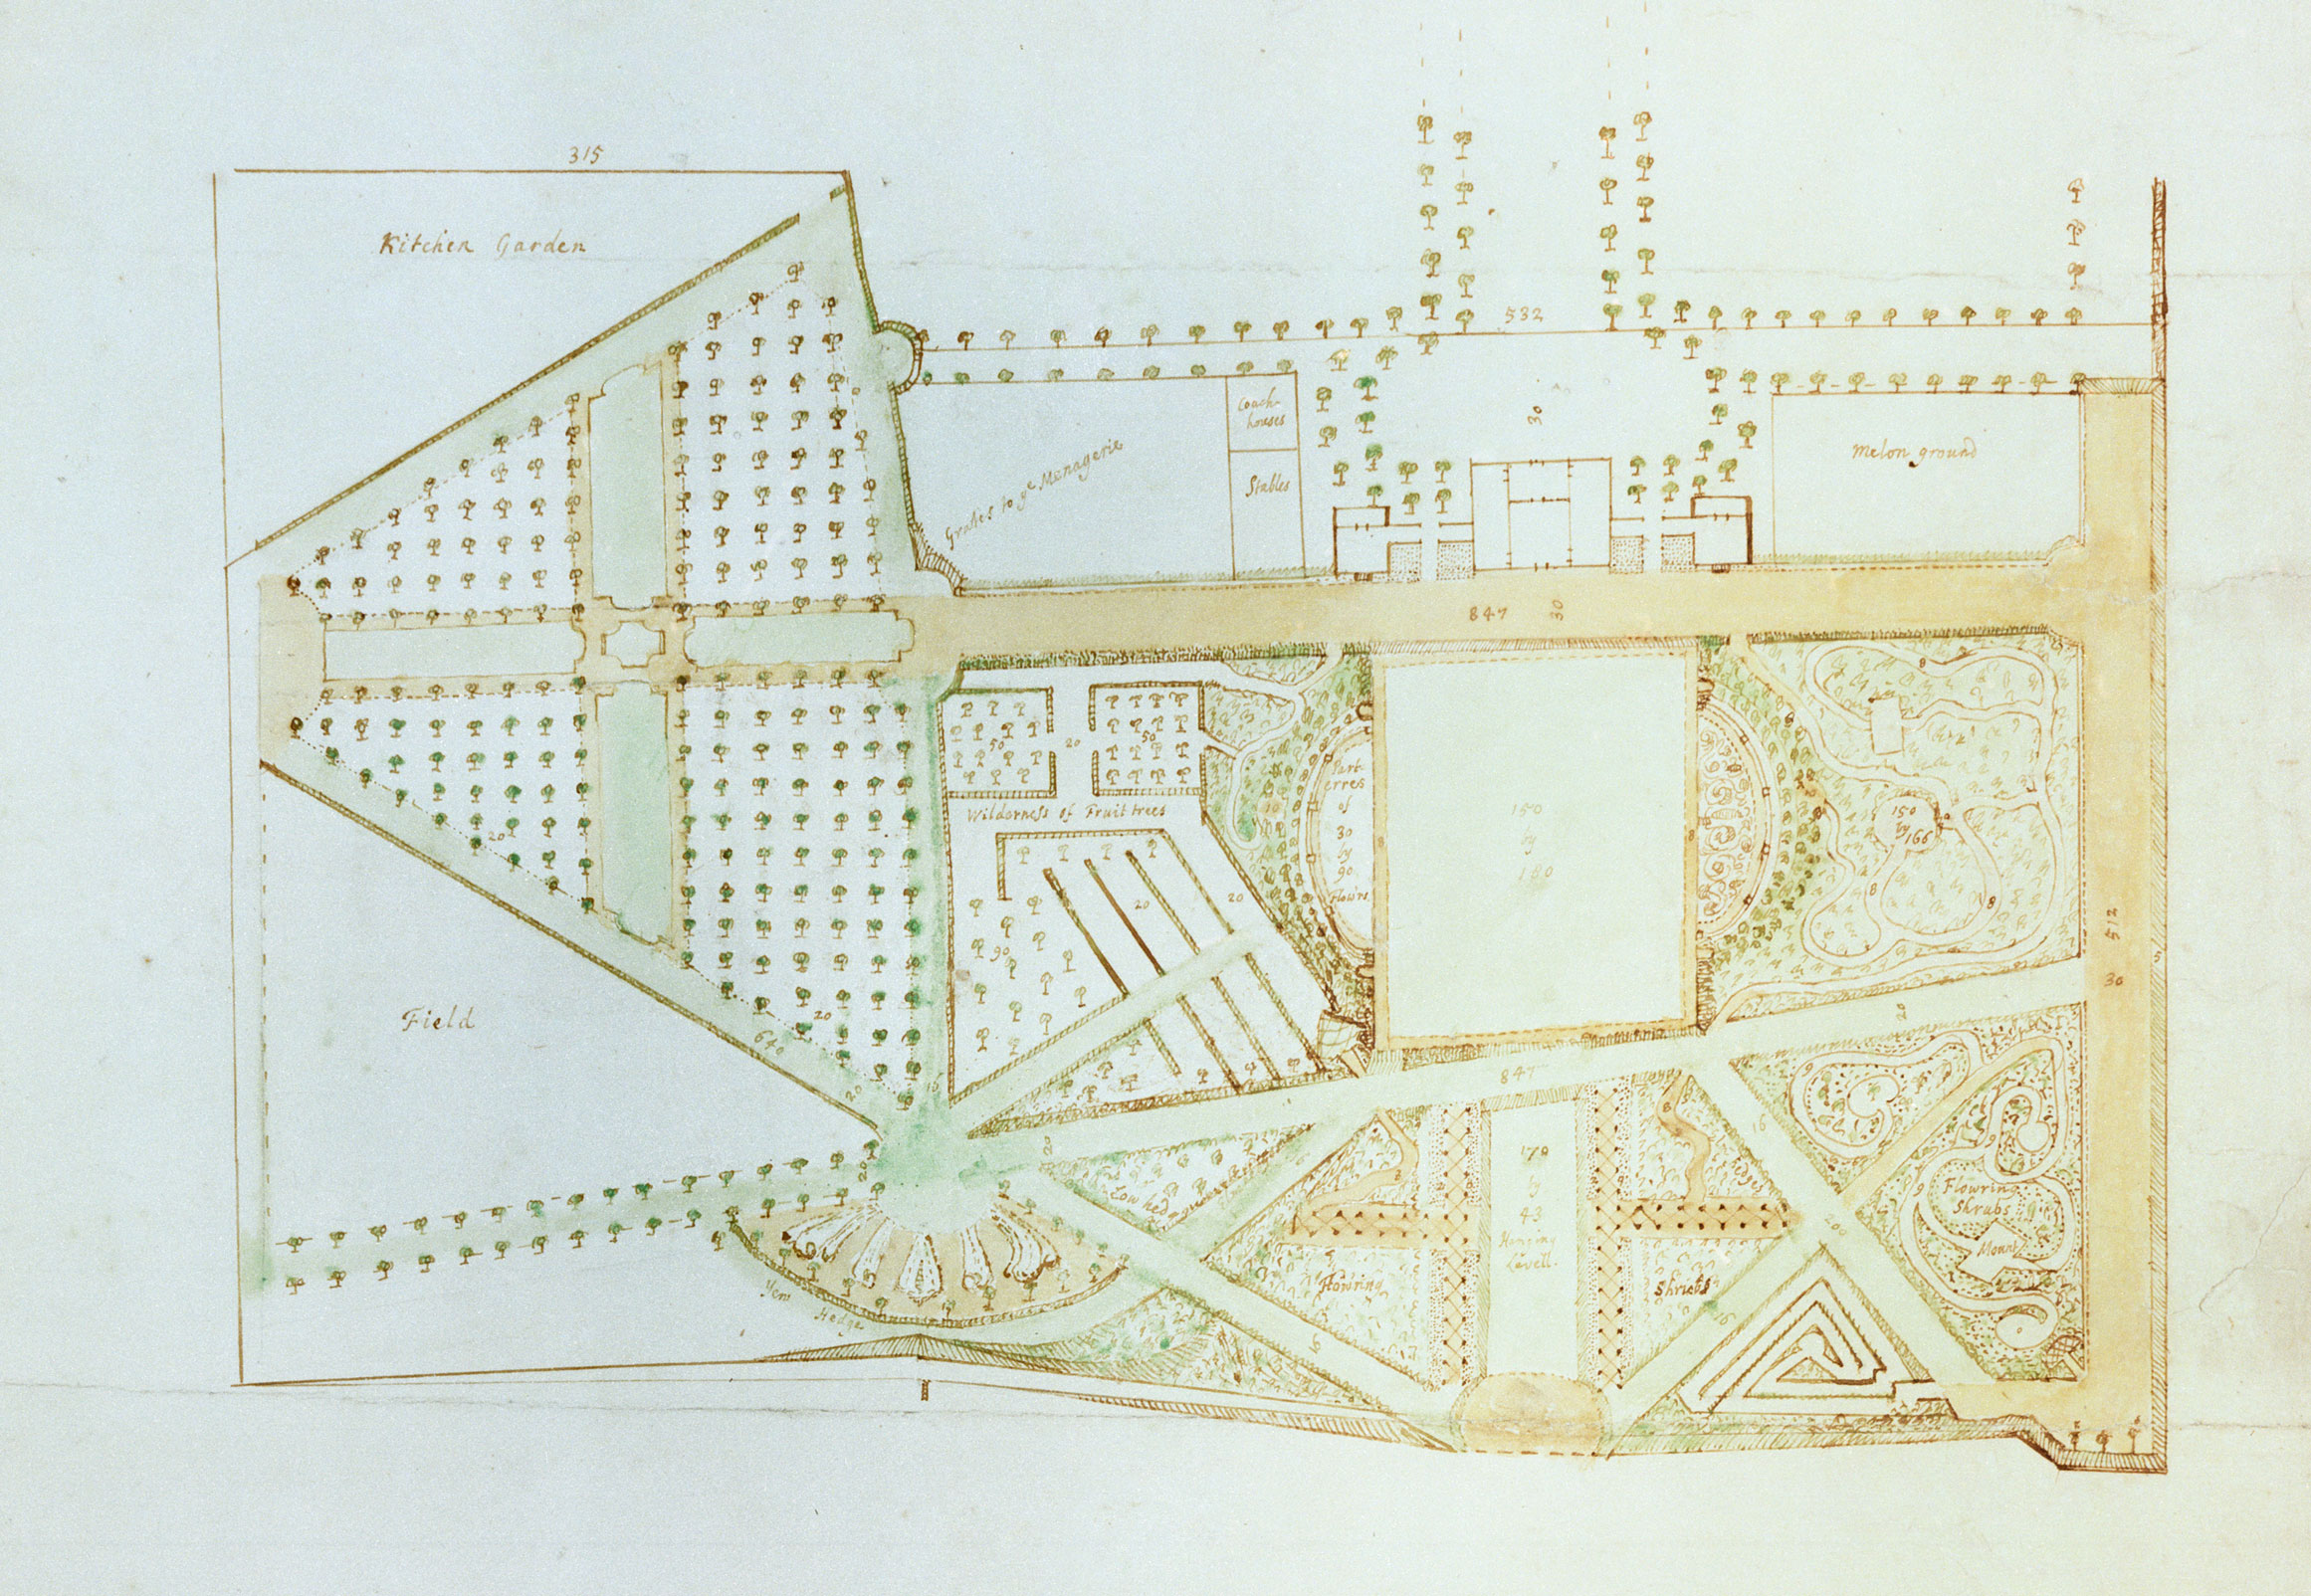 Detail of an early 18th century plan for the pleasure gardens.